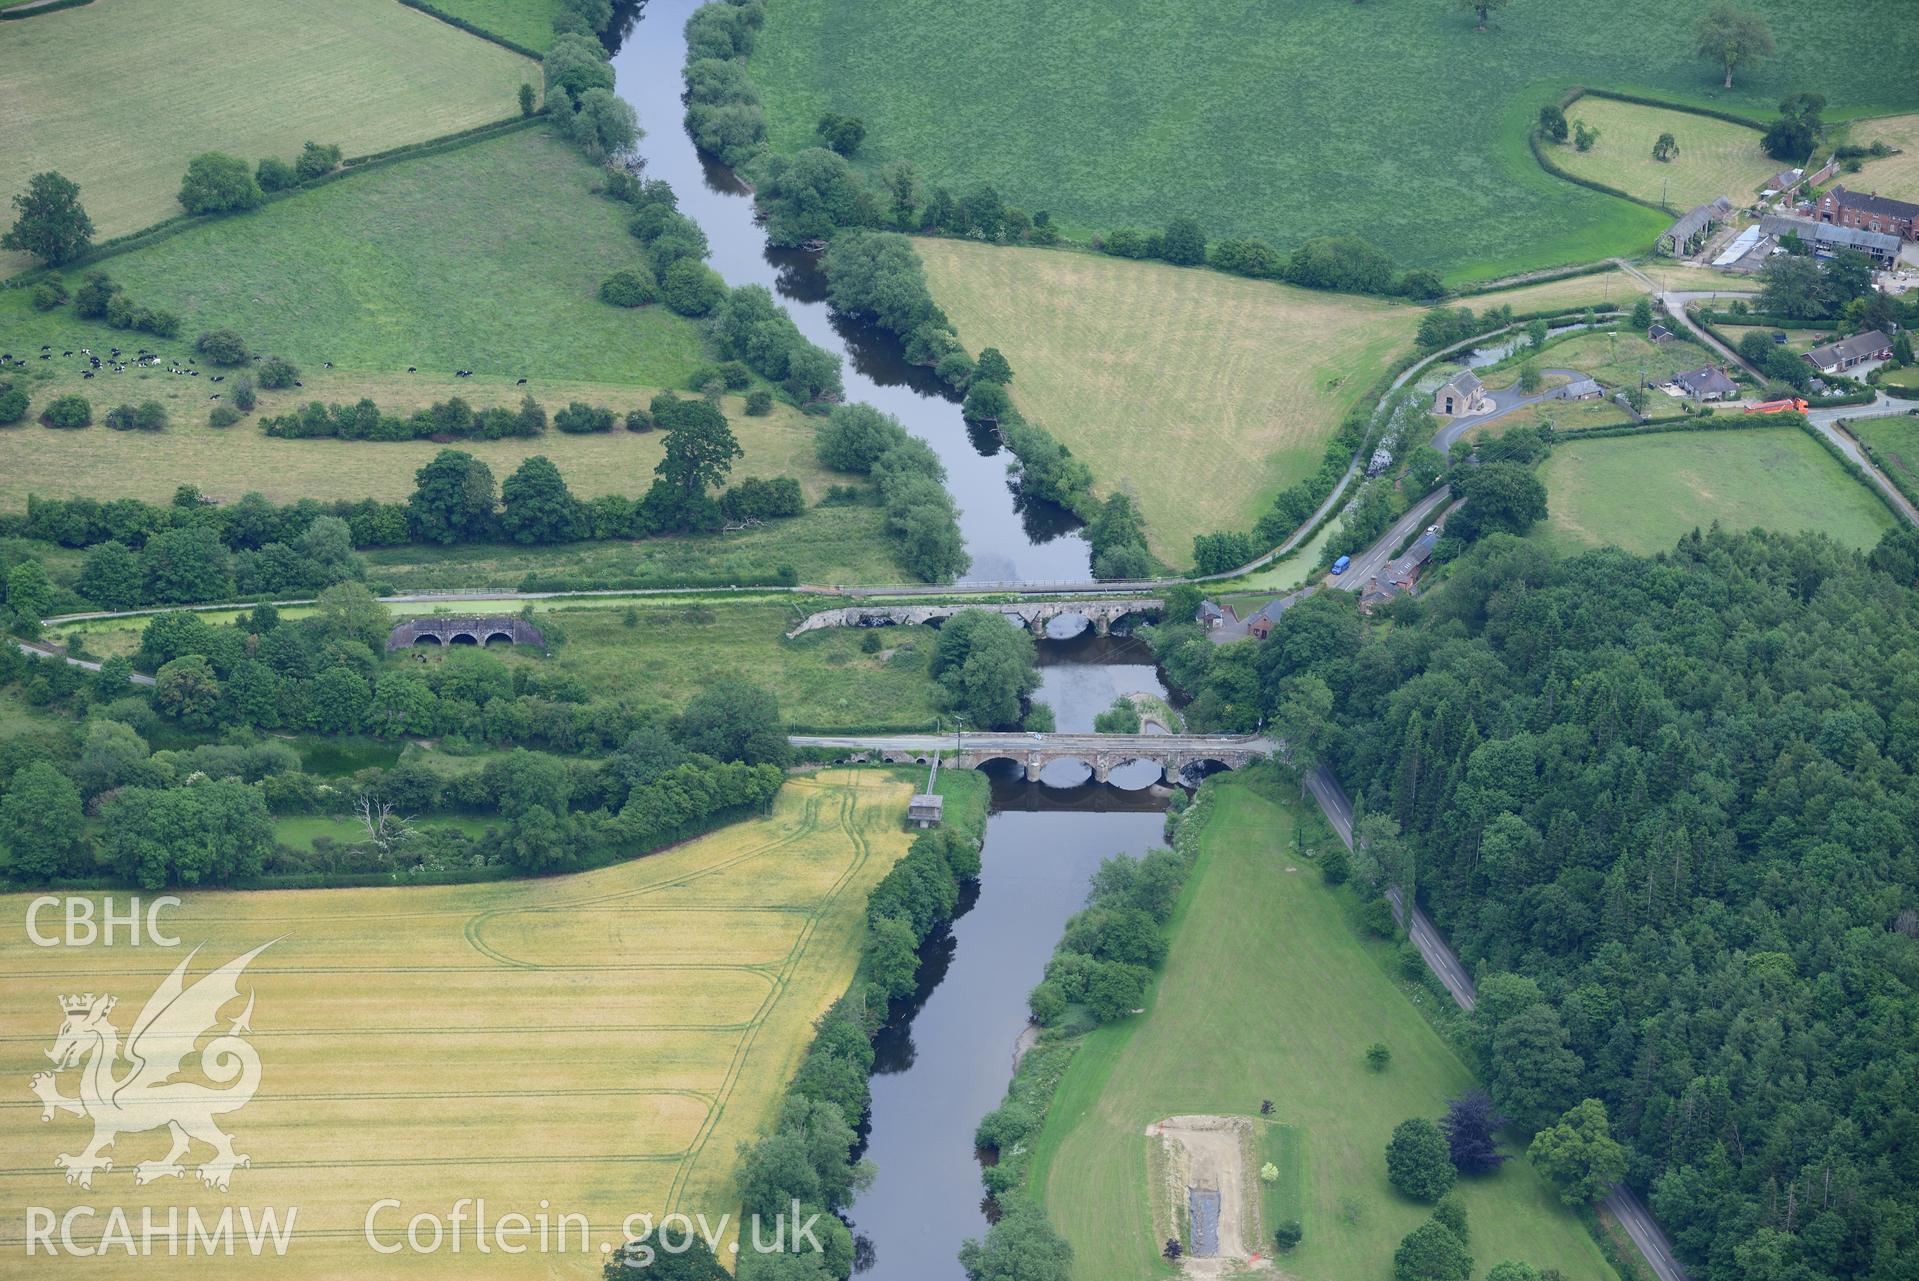 Vyrnwy aqueduct, Pentreheylin bridge and Vyrnwy south flood arches on the Montgomeryshire canal, south west of Oswestry. Oblique aerial photograph taken during the Royal Commission's programme of archaeological aerial reconnaissance by Toby Driver on 30th June 2015.